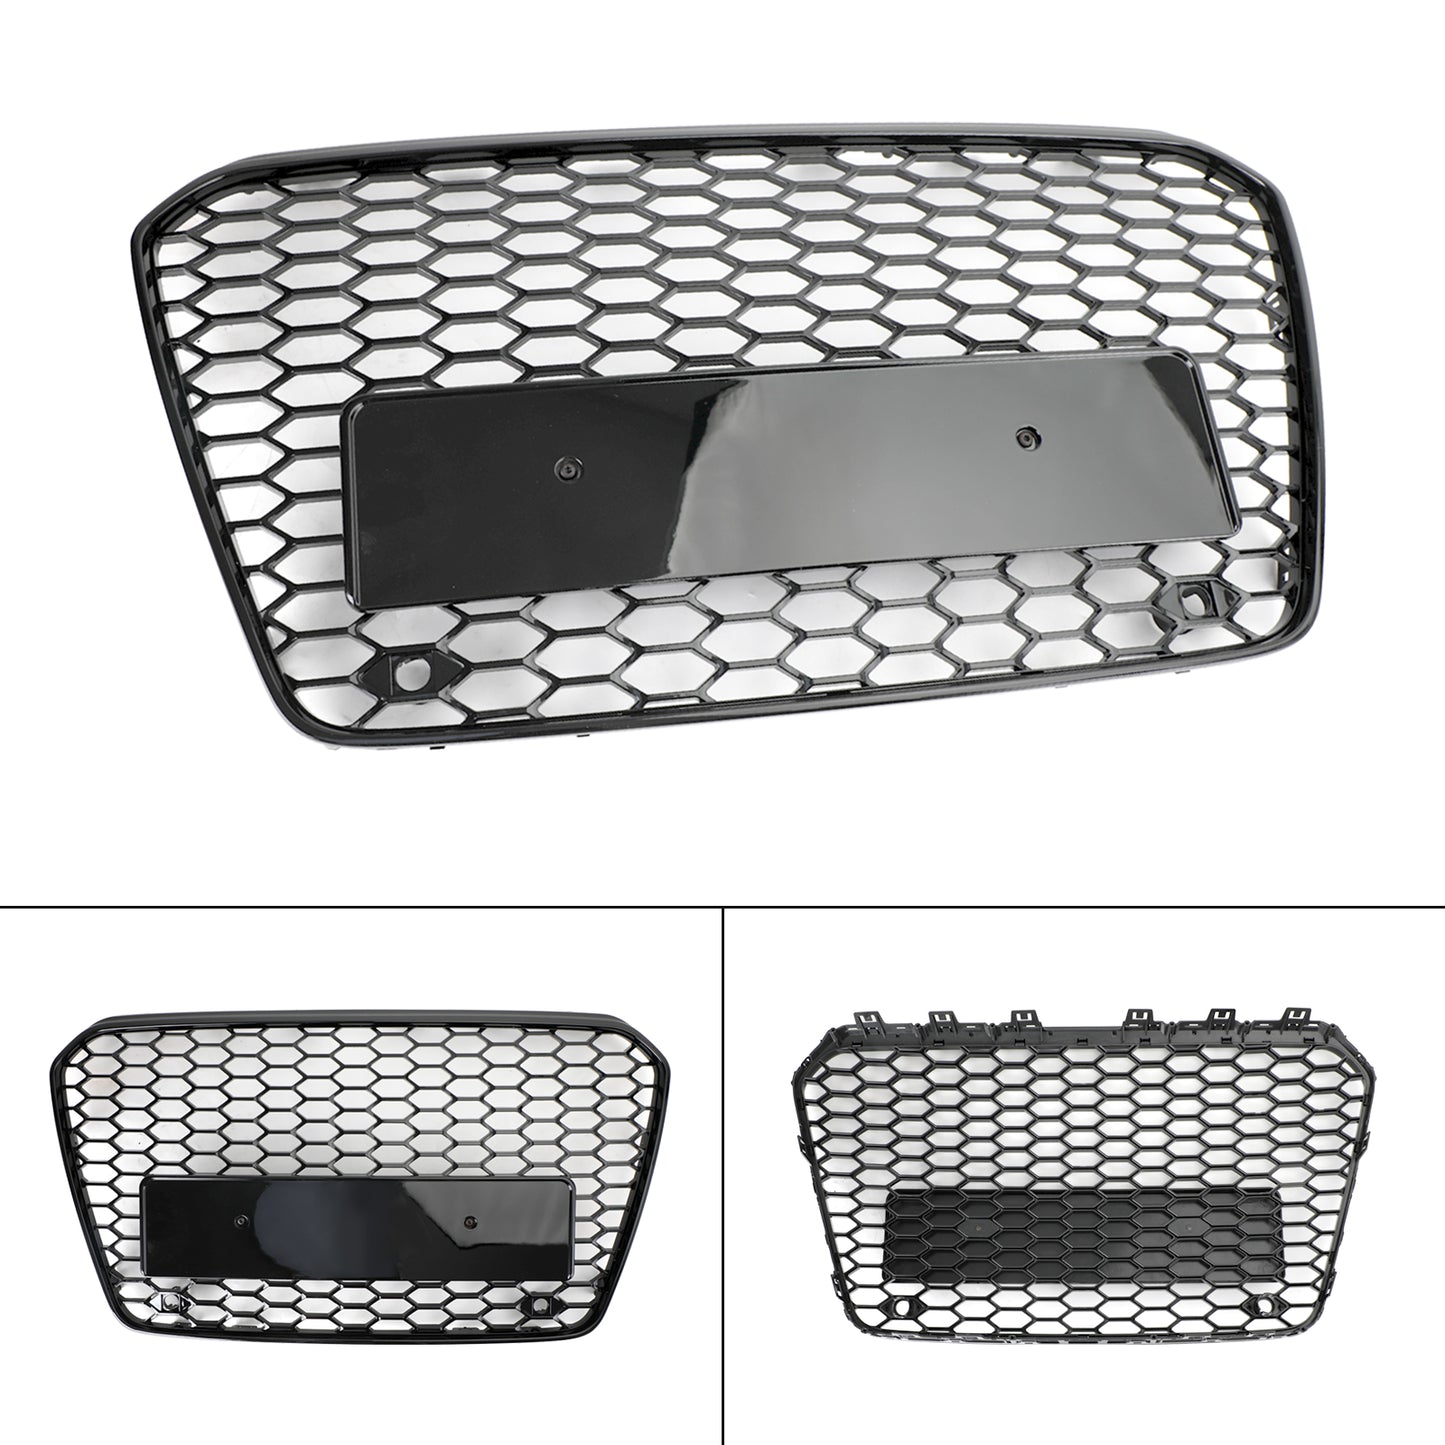 RS5 Style Honeycomb Mesh Front Bumper Grille Grill Fit Audi A5 S5 B8.5 2013-2016